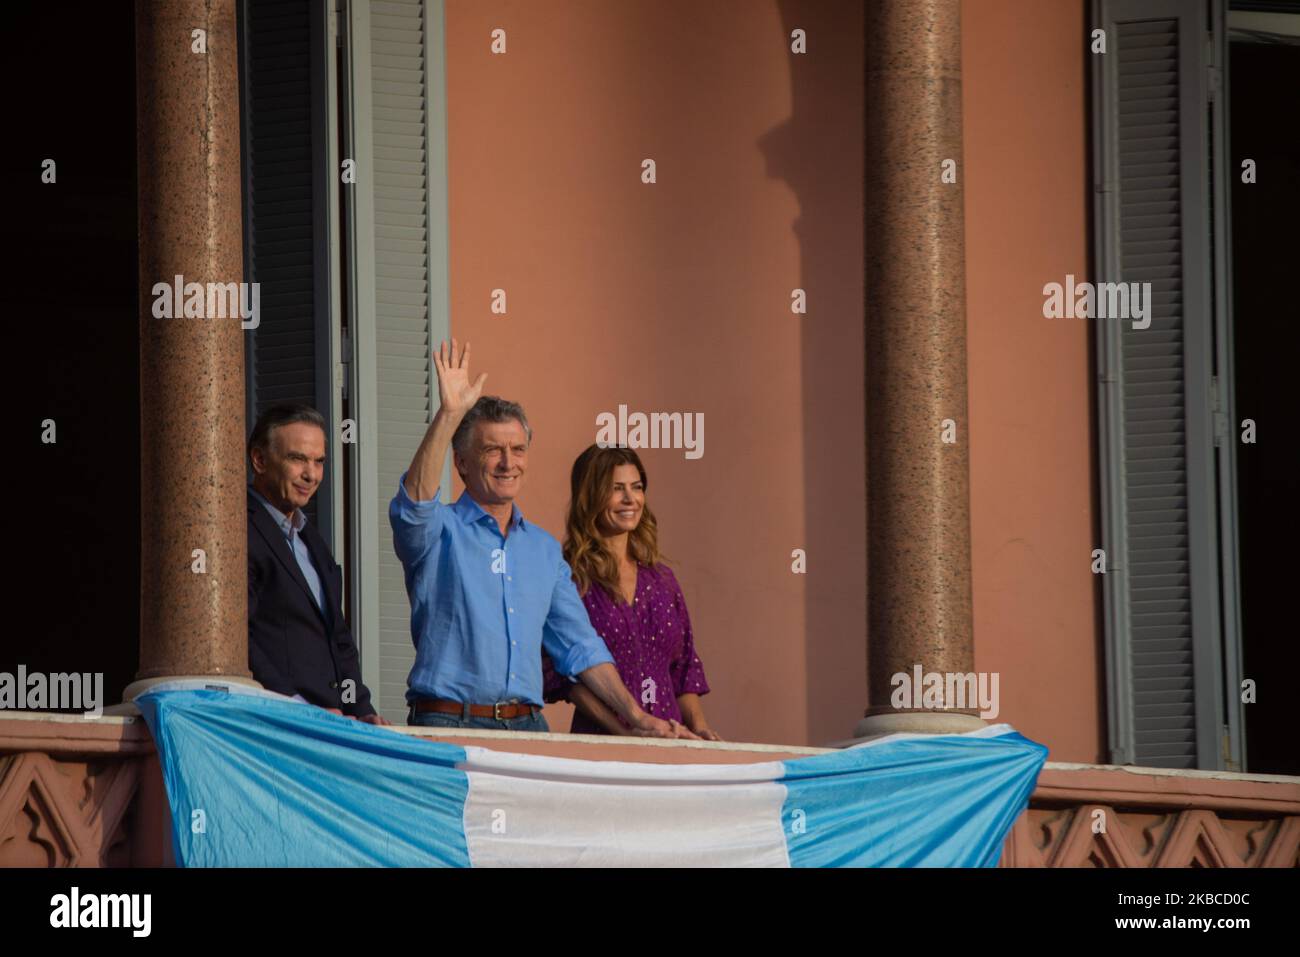 Argentina's President Mauricio Macri, center, his wife Juliana Awada and his running-mate Miguel Angel Pichetto stand on the balcony of the Casa Rosada executive mansion, during a rally in support of Macri, in Buenos Aires, Argentina, Saturday, Dec. 7, 2019 (Photo by Mario De Fina/NurPhoto) Stock Photo